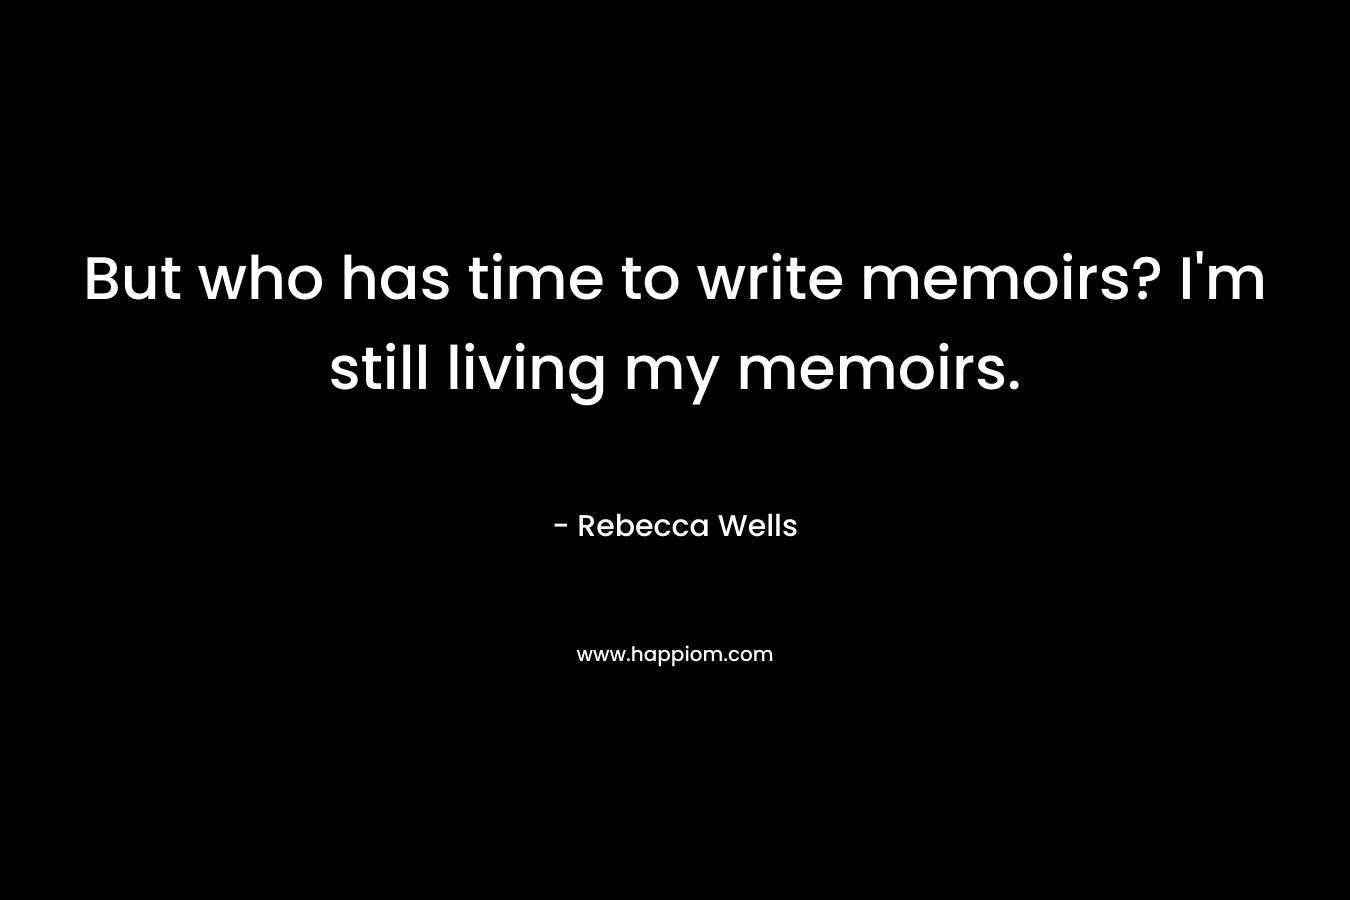 But who has time to write memoirs? I’m still living my memoirs. – Rebecca Wells